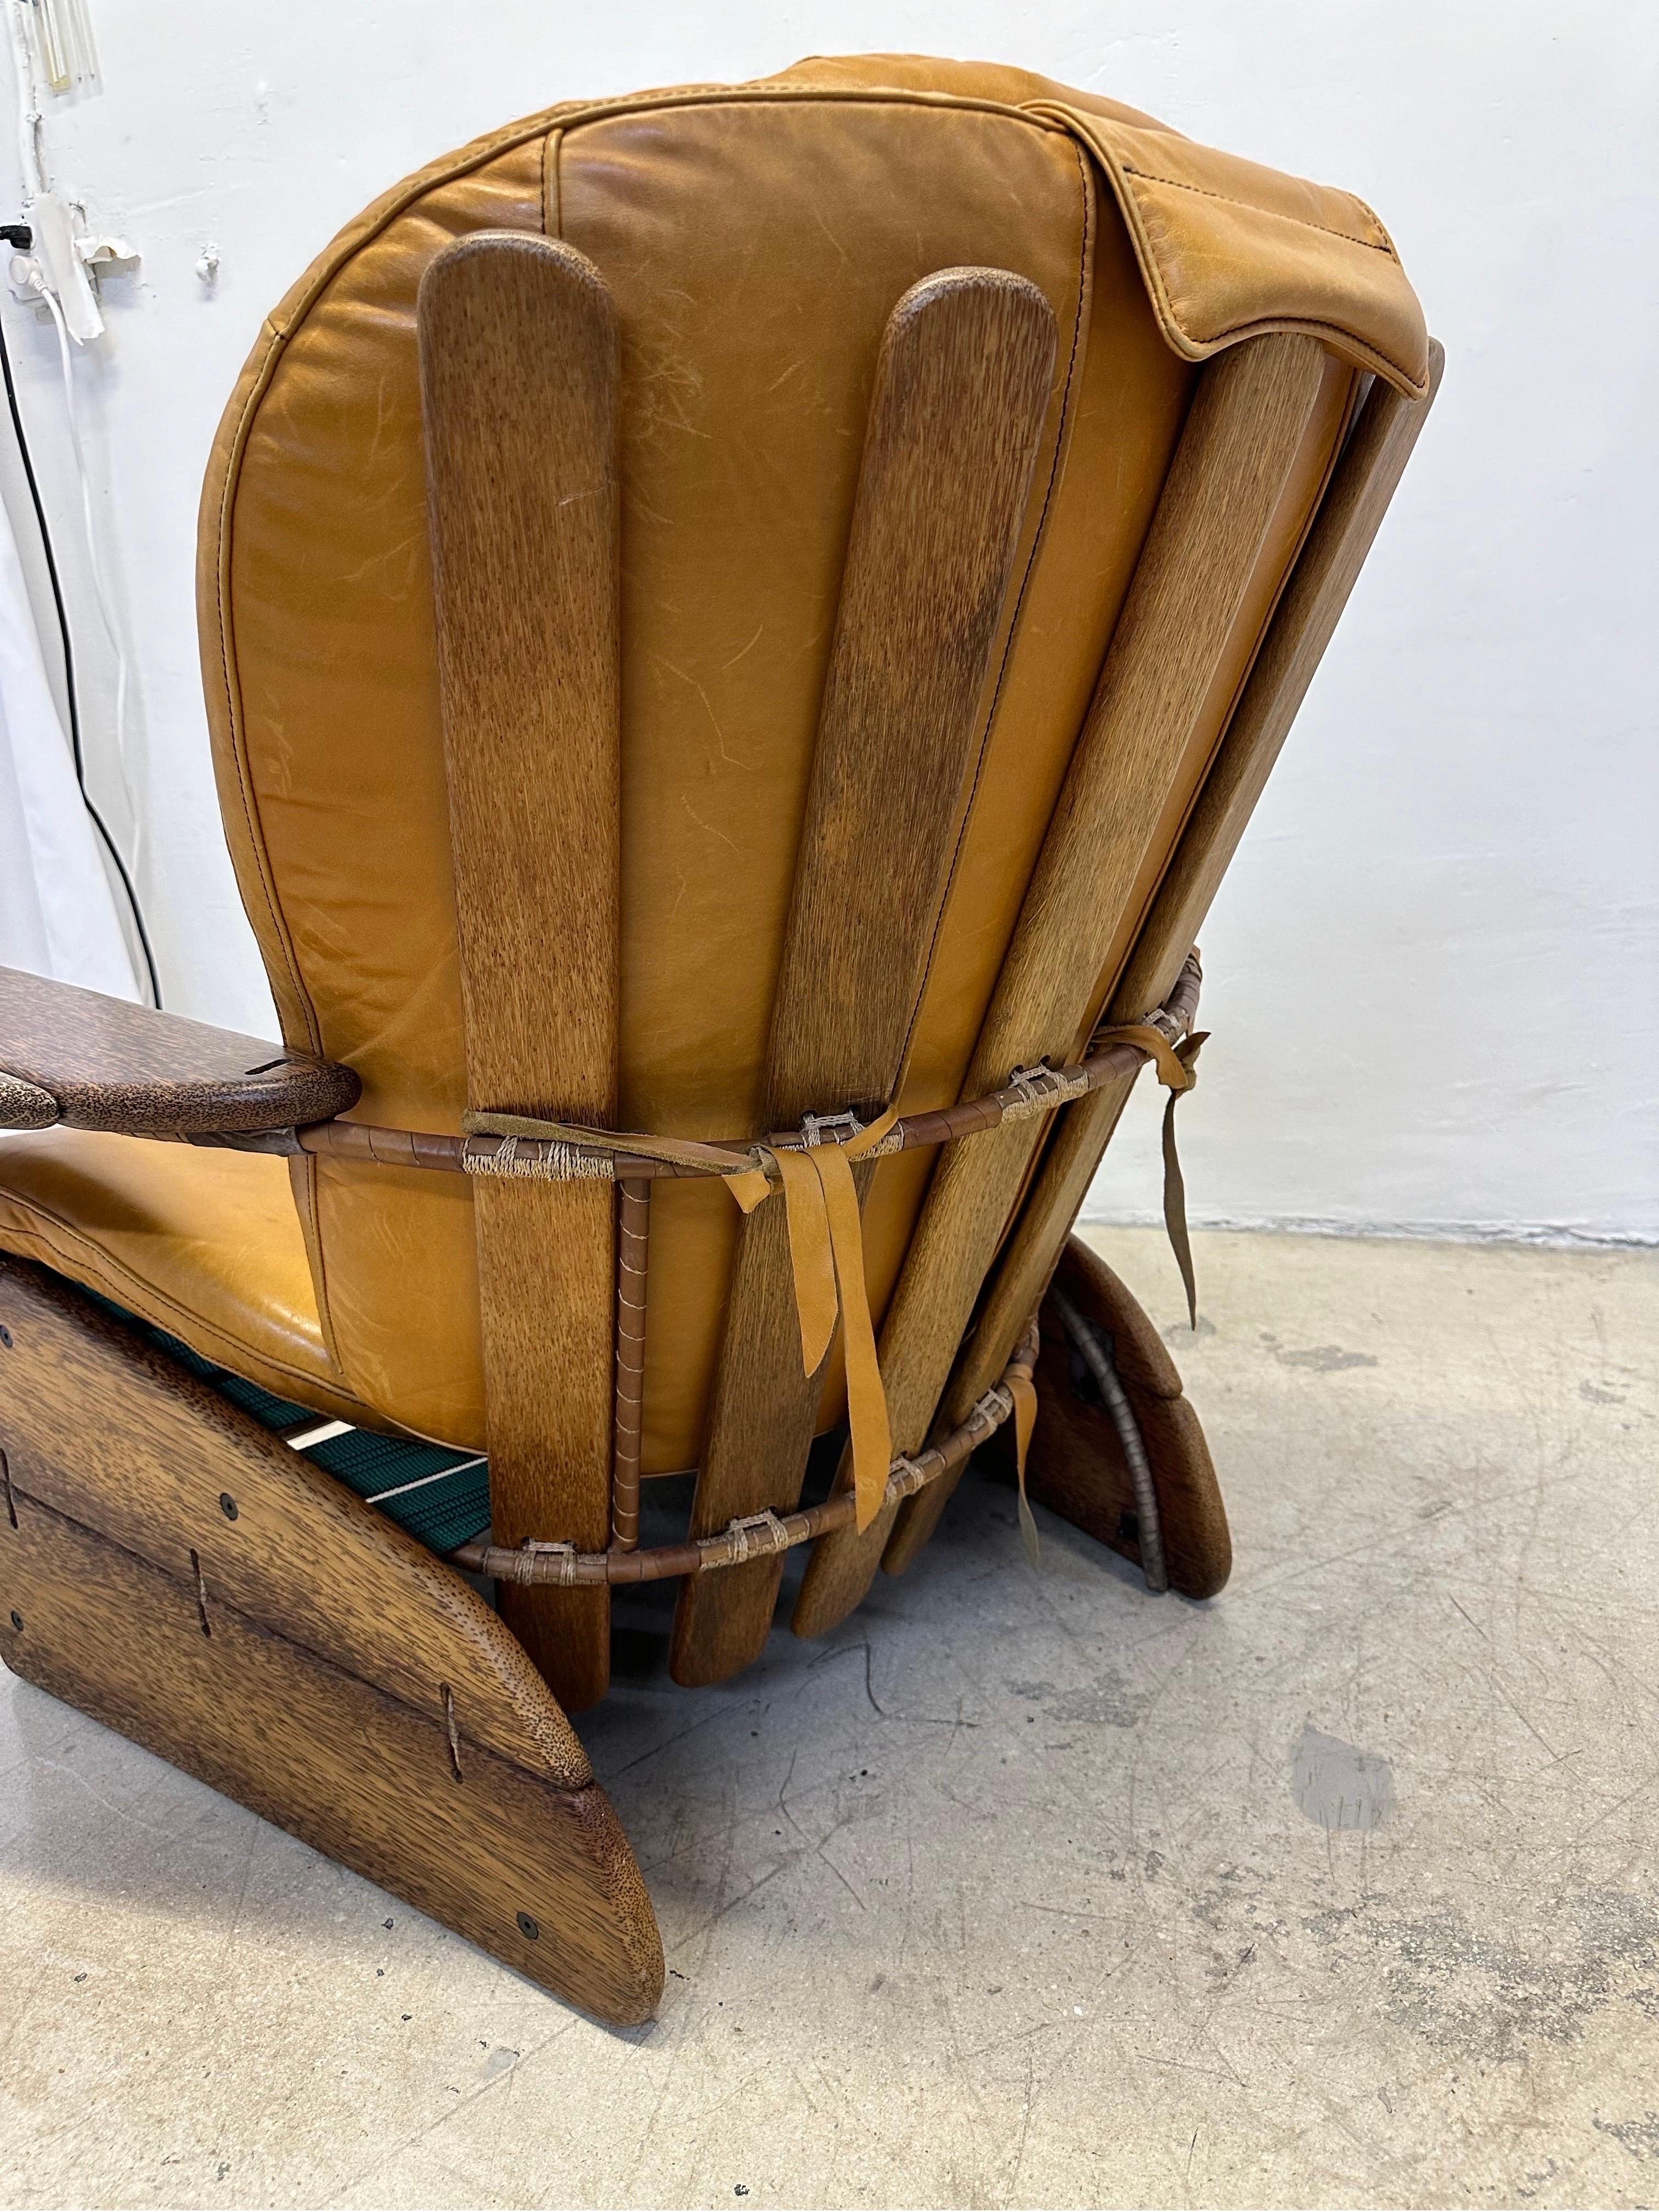 Pacific Green Havana Palmwood and Leather Lounge Chair For Sale 6